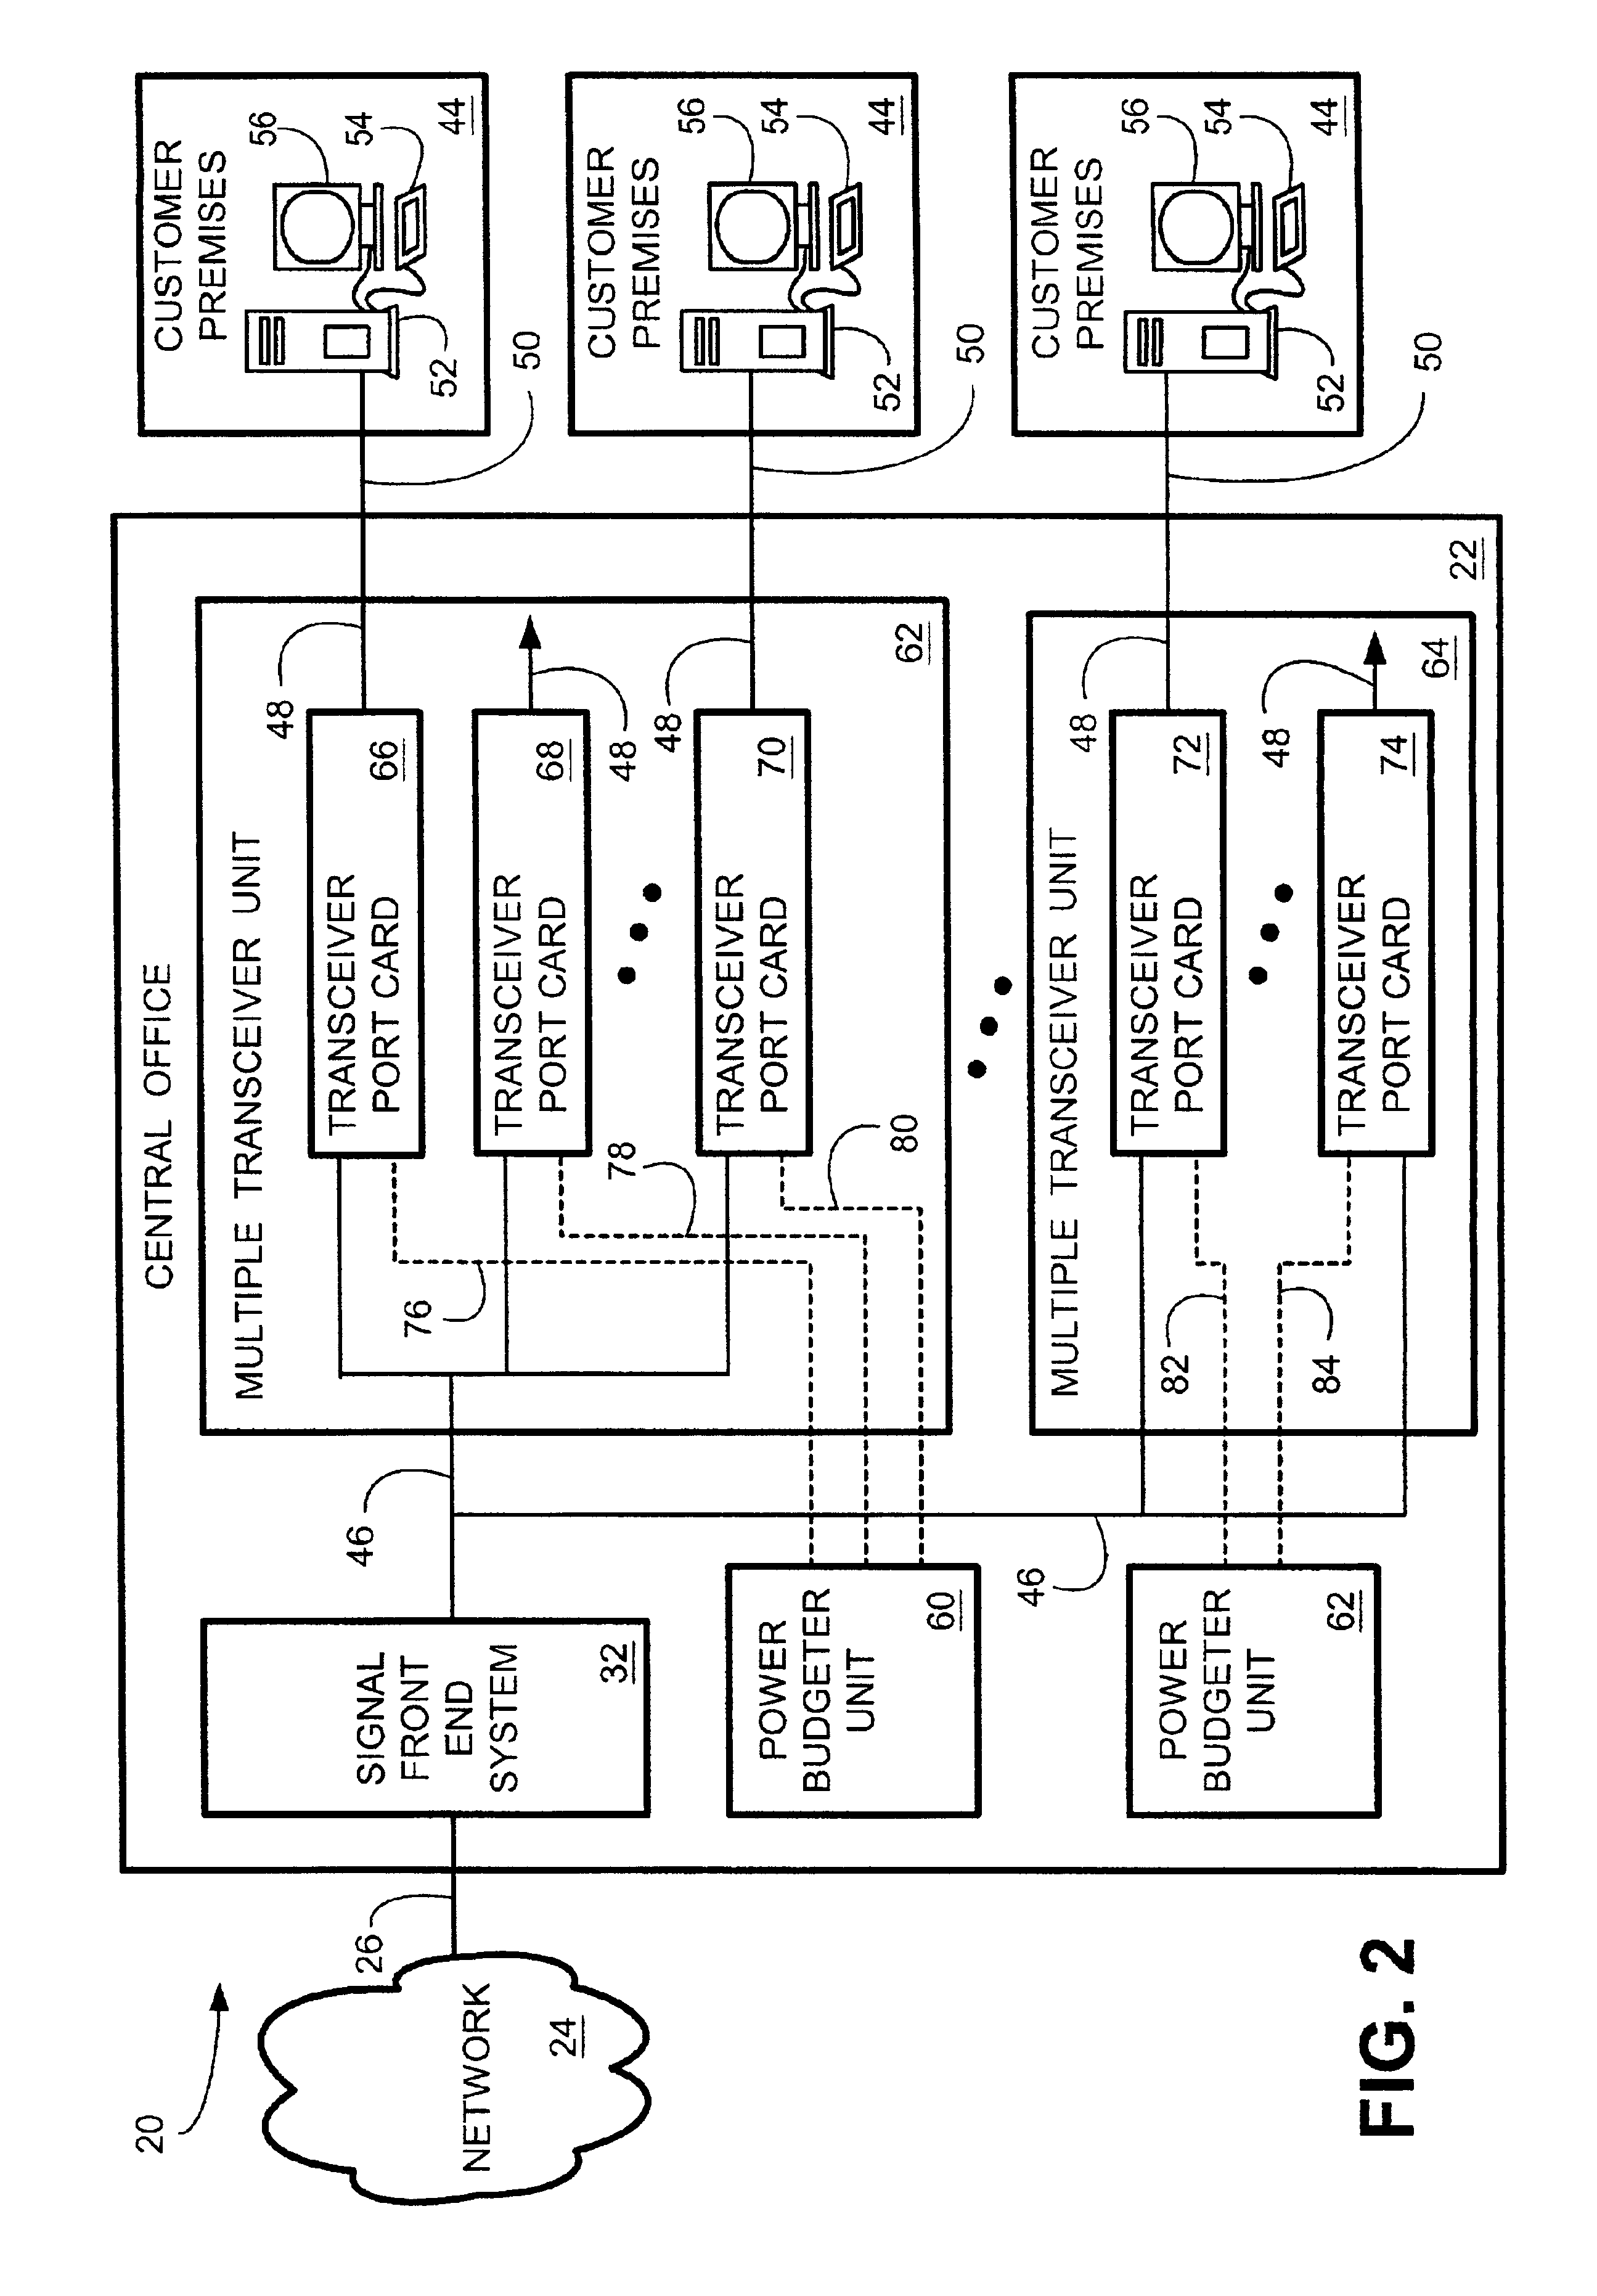 System and method for statistical control of power dissipation with host enforcement